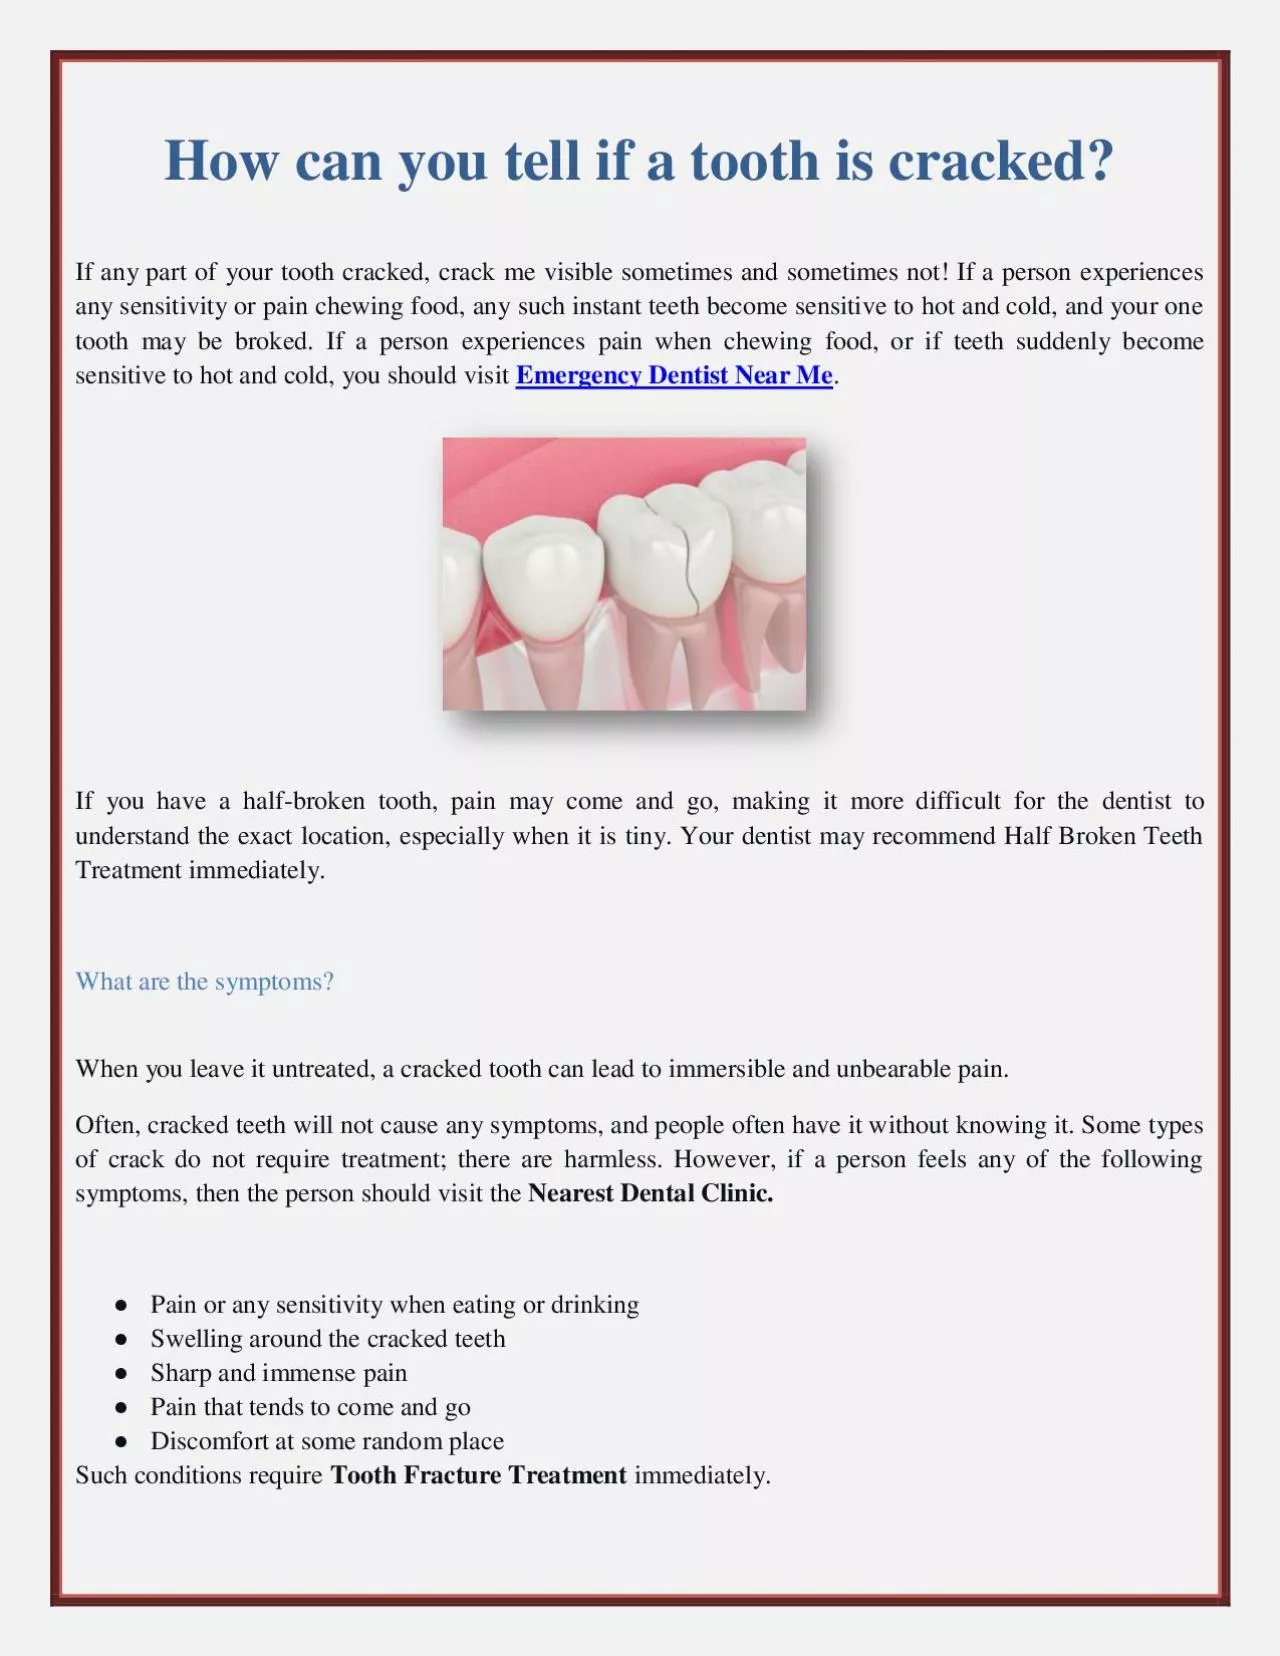 How can you tell if a tooth is cracked?